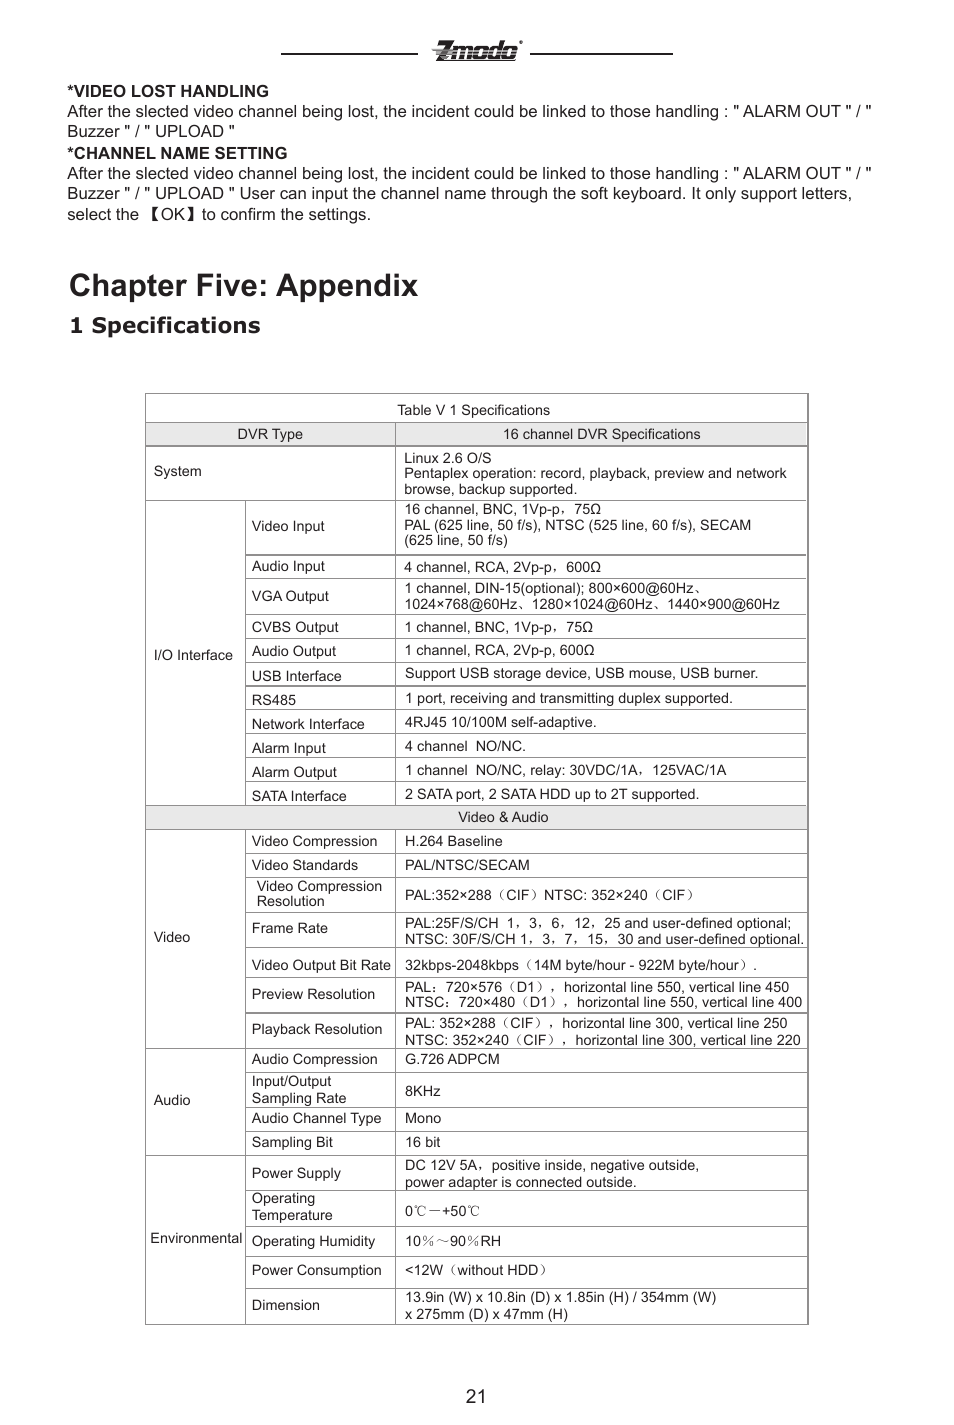 Chapter five: appendix, 1 specifications | ZMODO ZMD-DC-SBN6 16 Channel Standalone DVR User Manual | Page 22 / 28